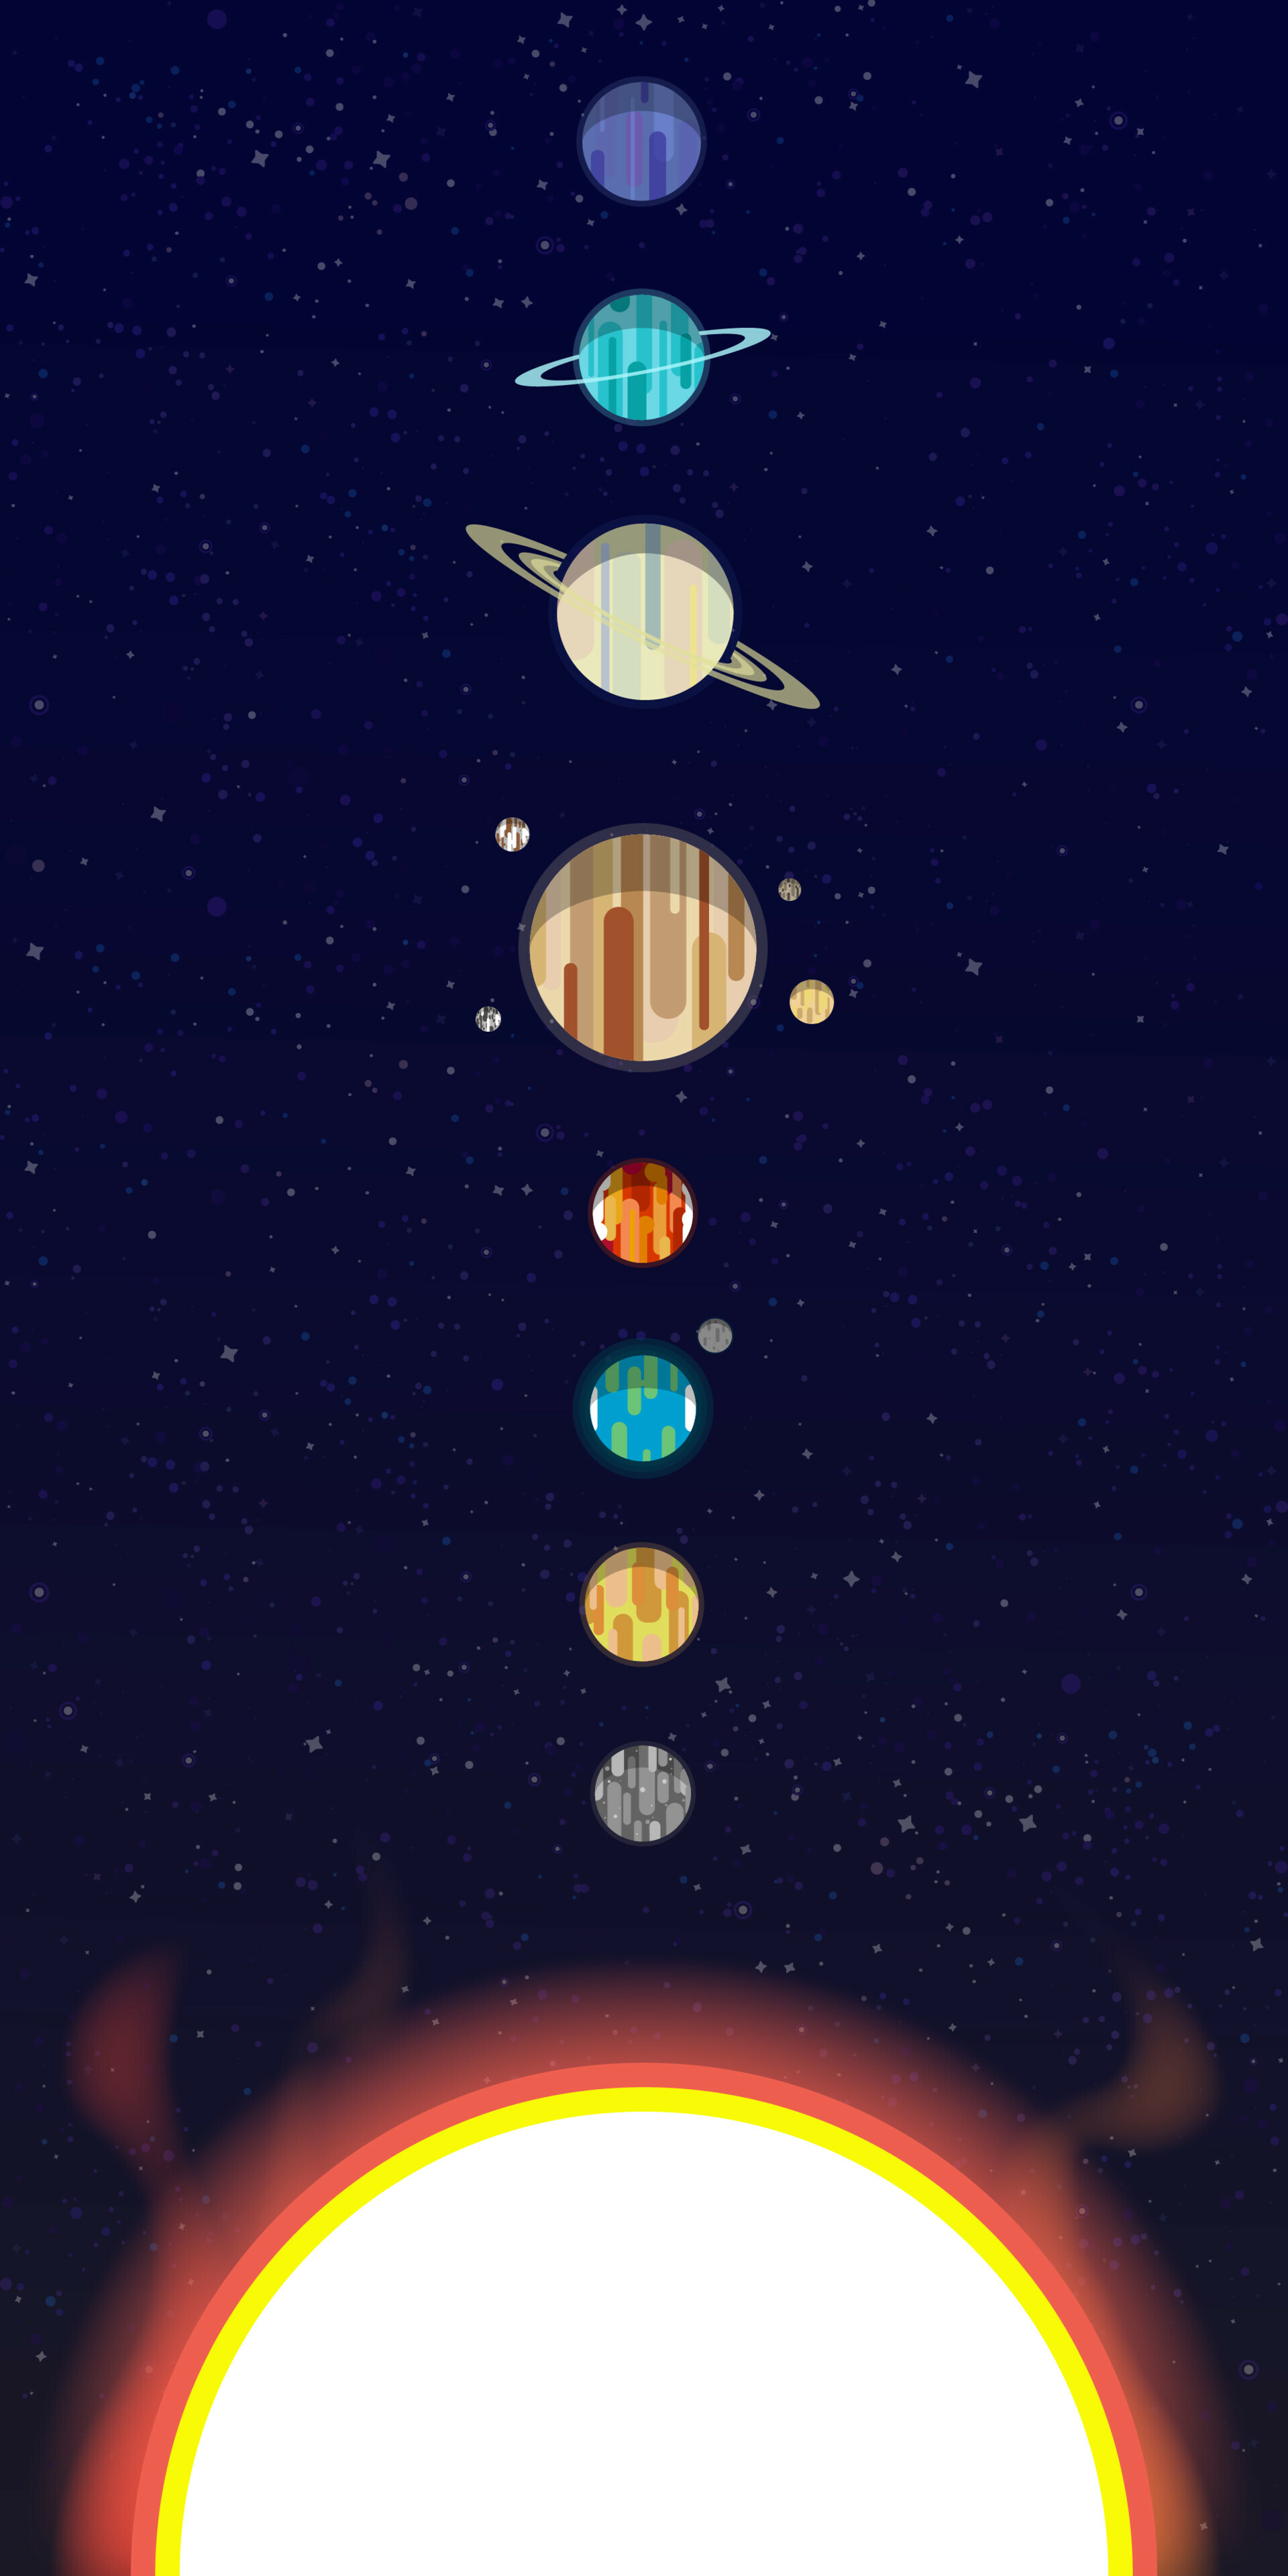 Solar System: A group of planets, meteors, or other objects that orbit a large star. 1920x3840 HD Wallpaper.